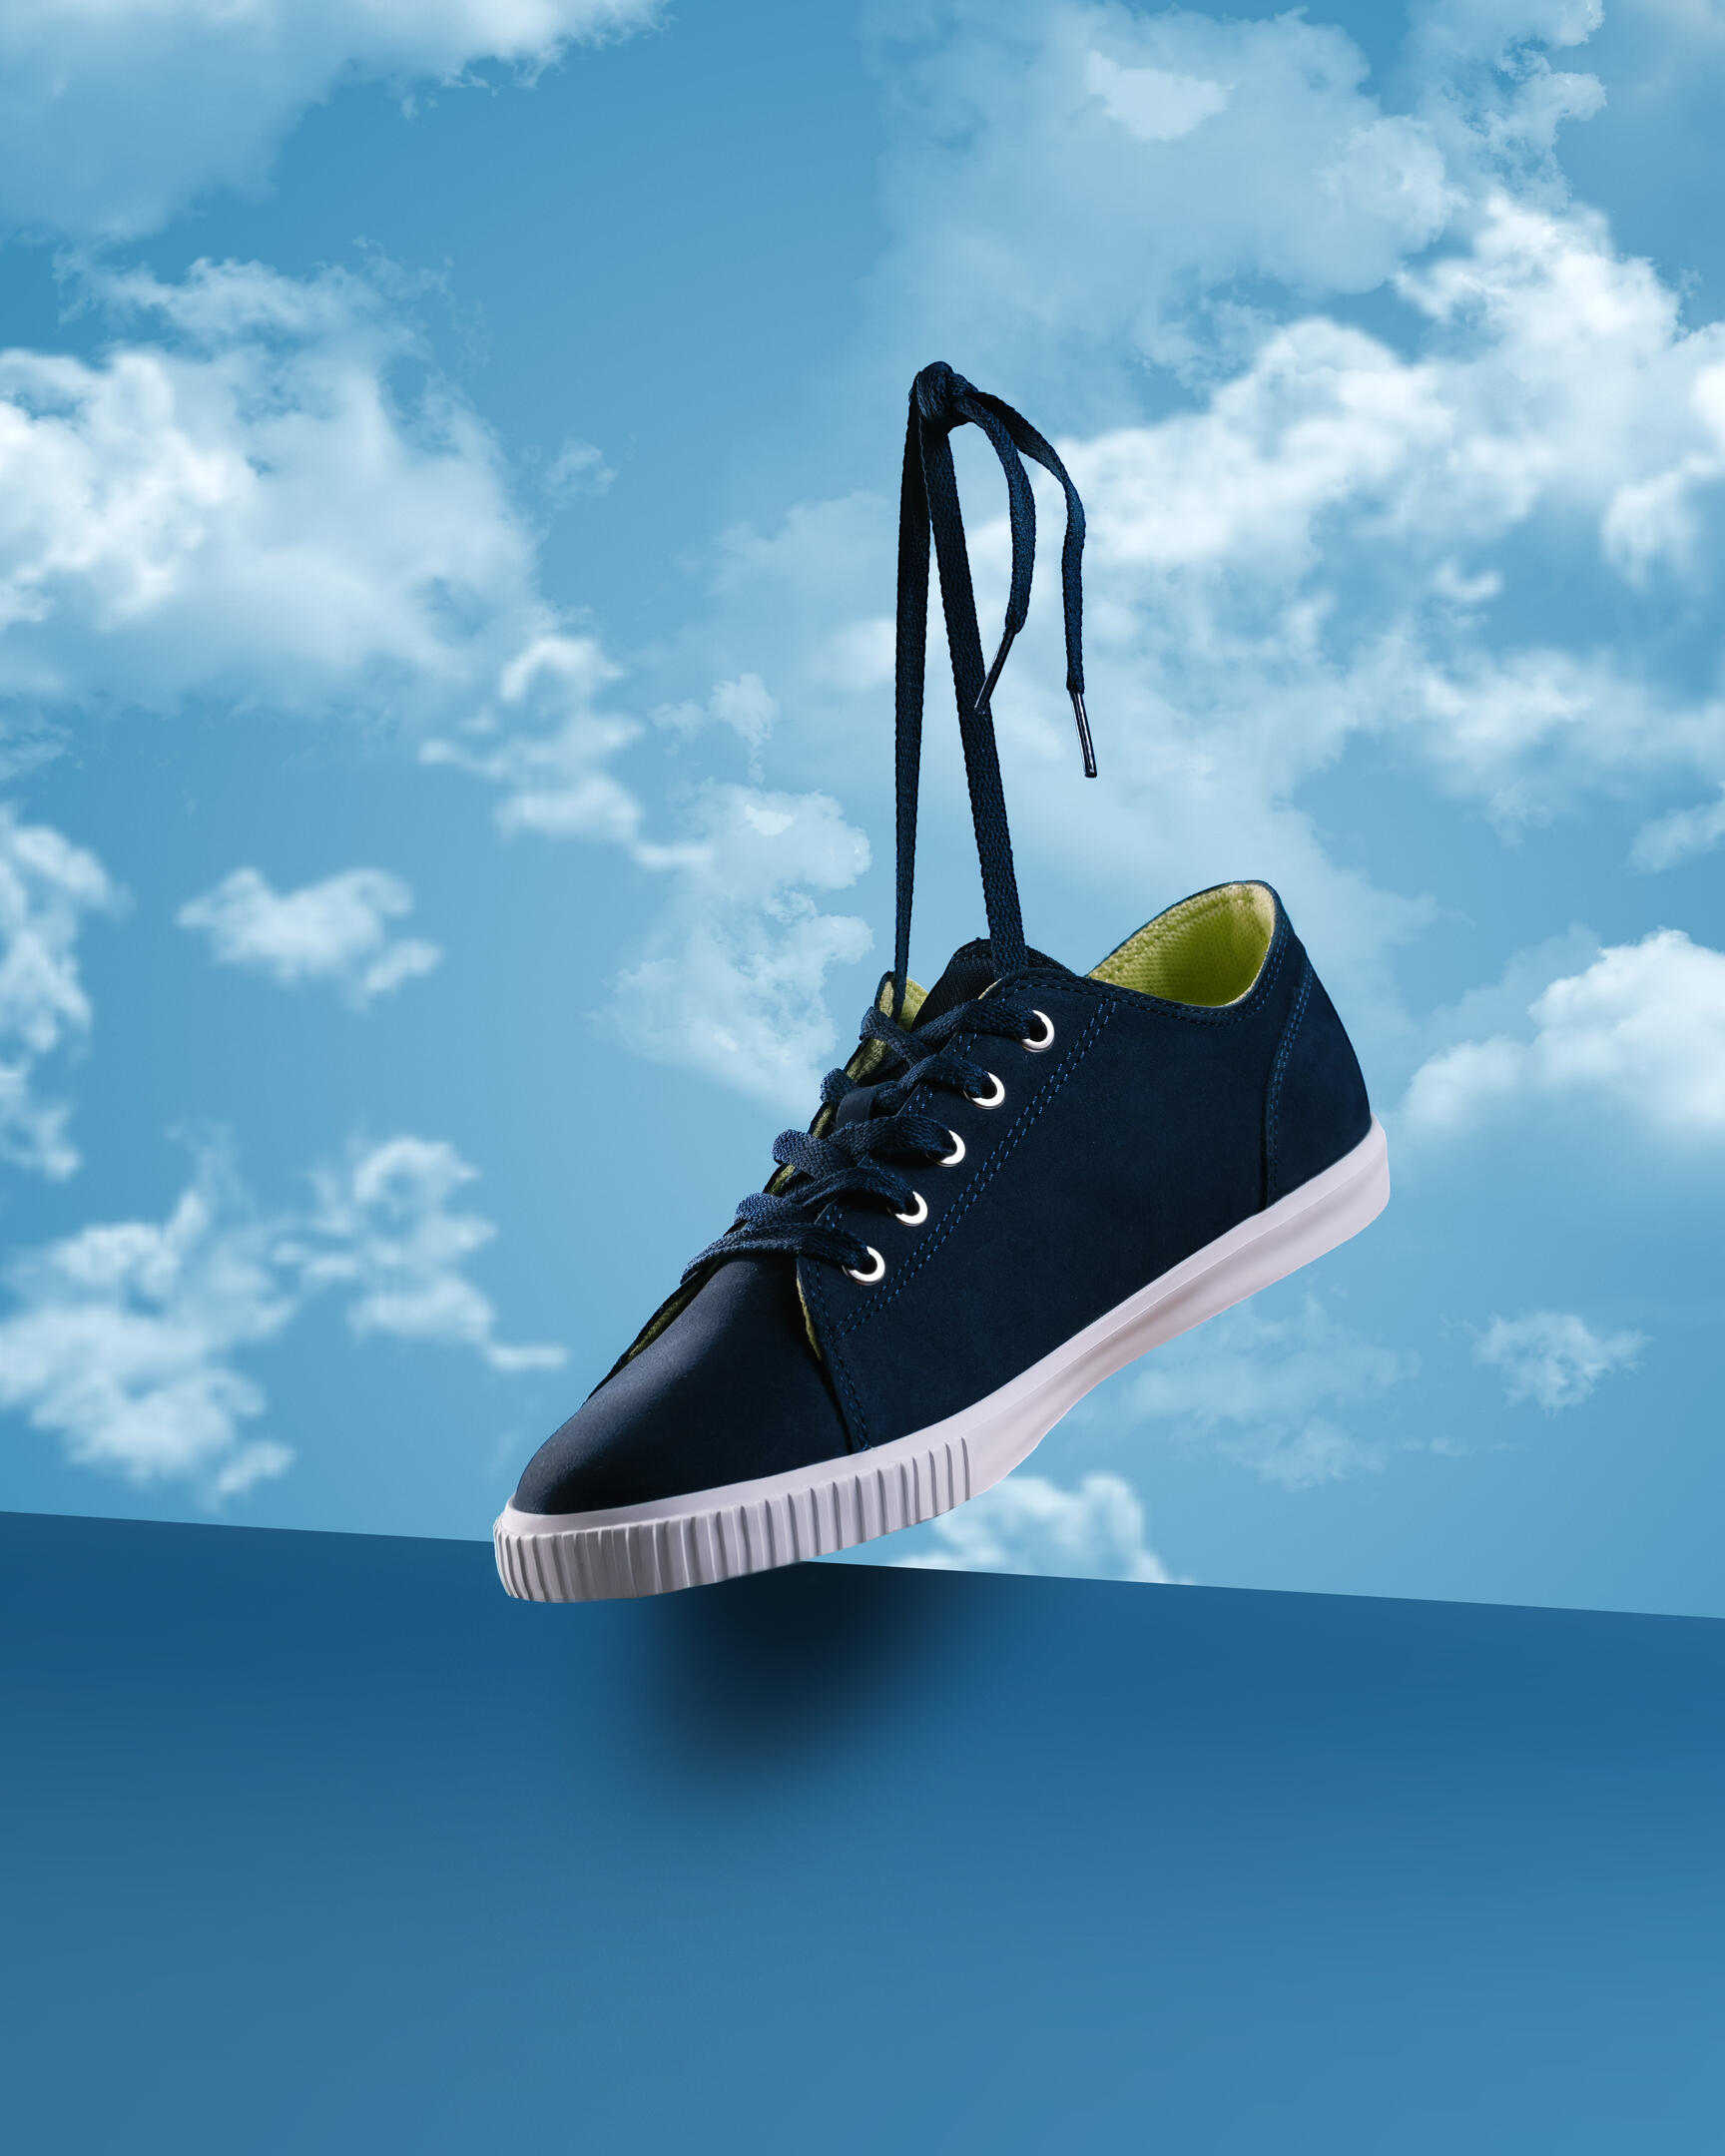 Sneakers - Hero view. Blue canvas sneakers hover in the air and hover over a blue base. The sneakers cast a shadow on the blue stand. In the background, you can see a bright sky with clouds.